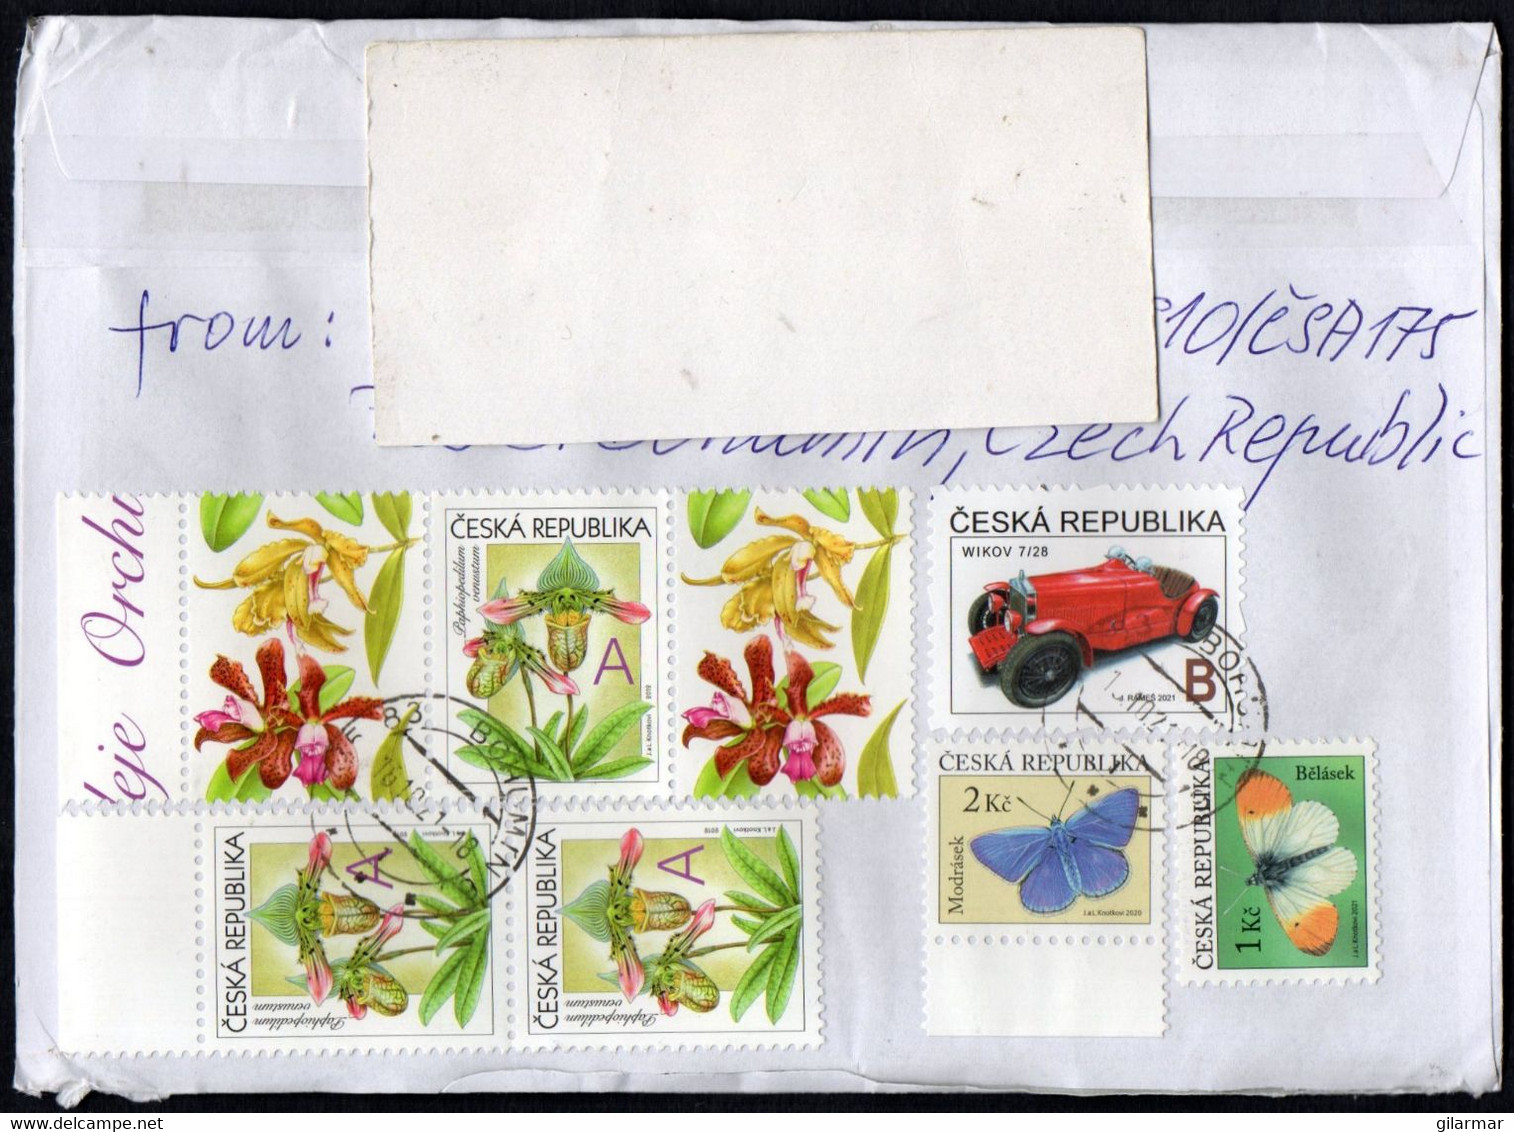 CZECH REPUBLIC 2021 - REGISTERED ENVELOPE - VOLLEYBALL POSTAL STATIONERY - BACK SIDE: BUTTERFLY / CARS / FLOWERS - Lettres & Documents